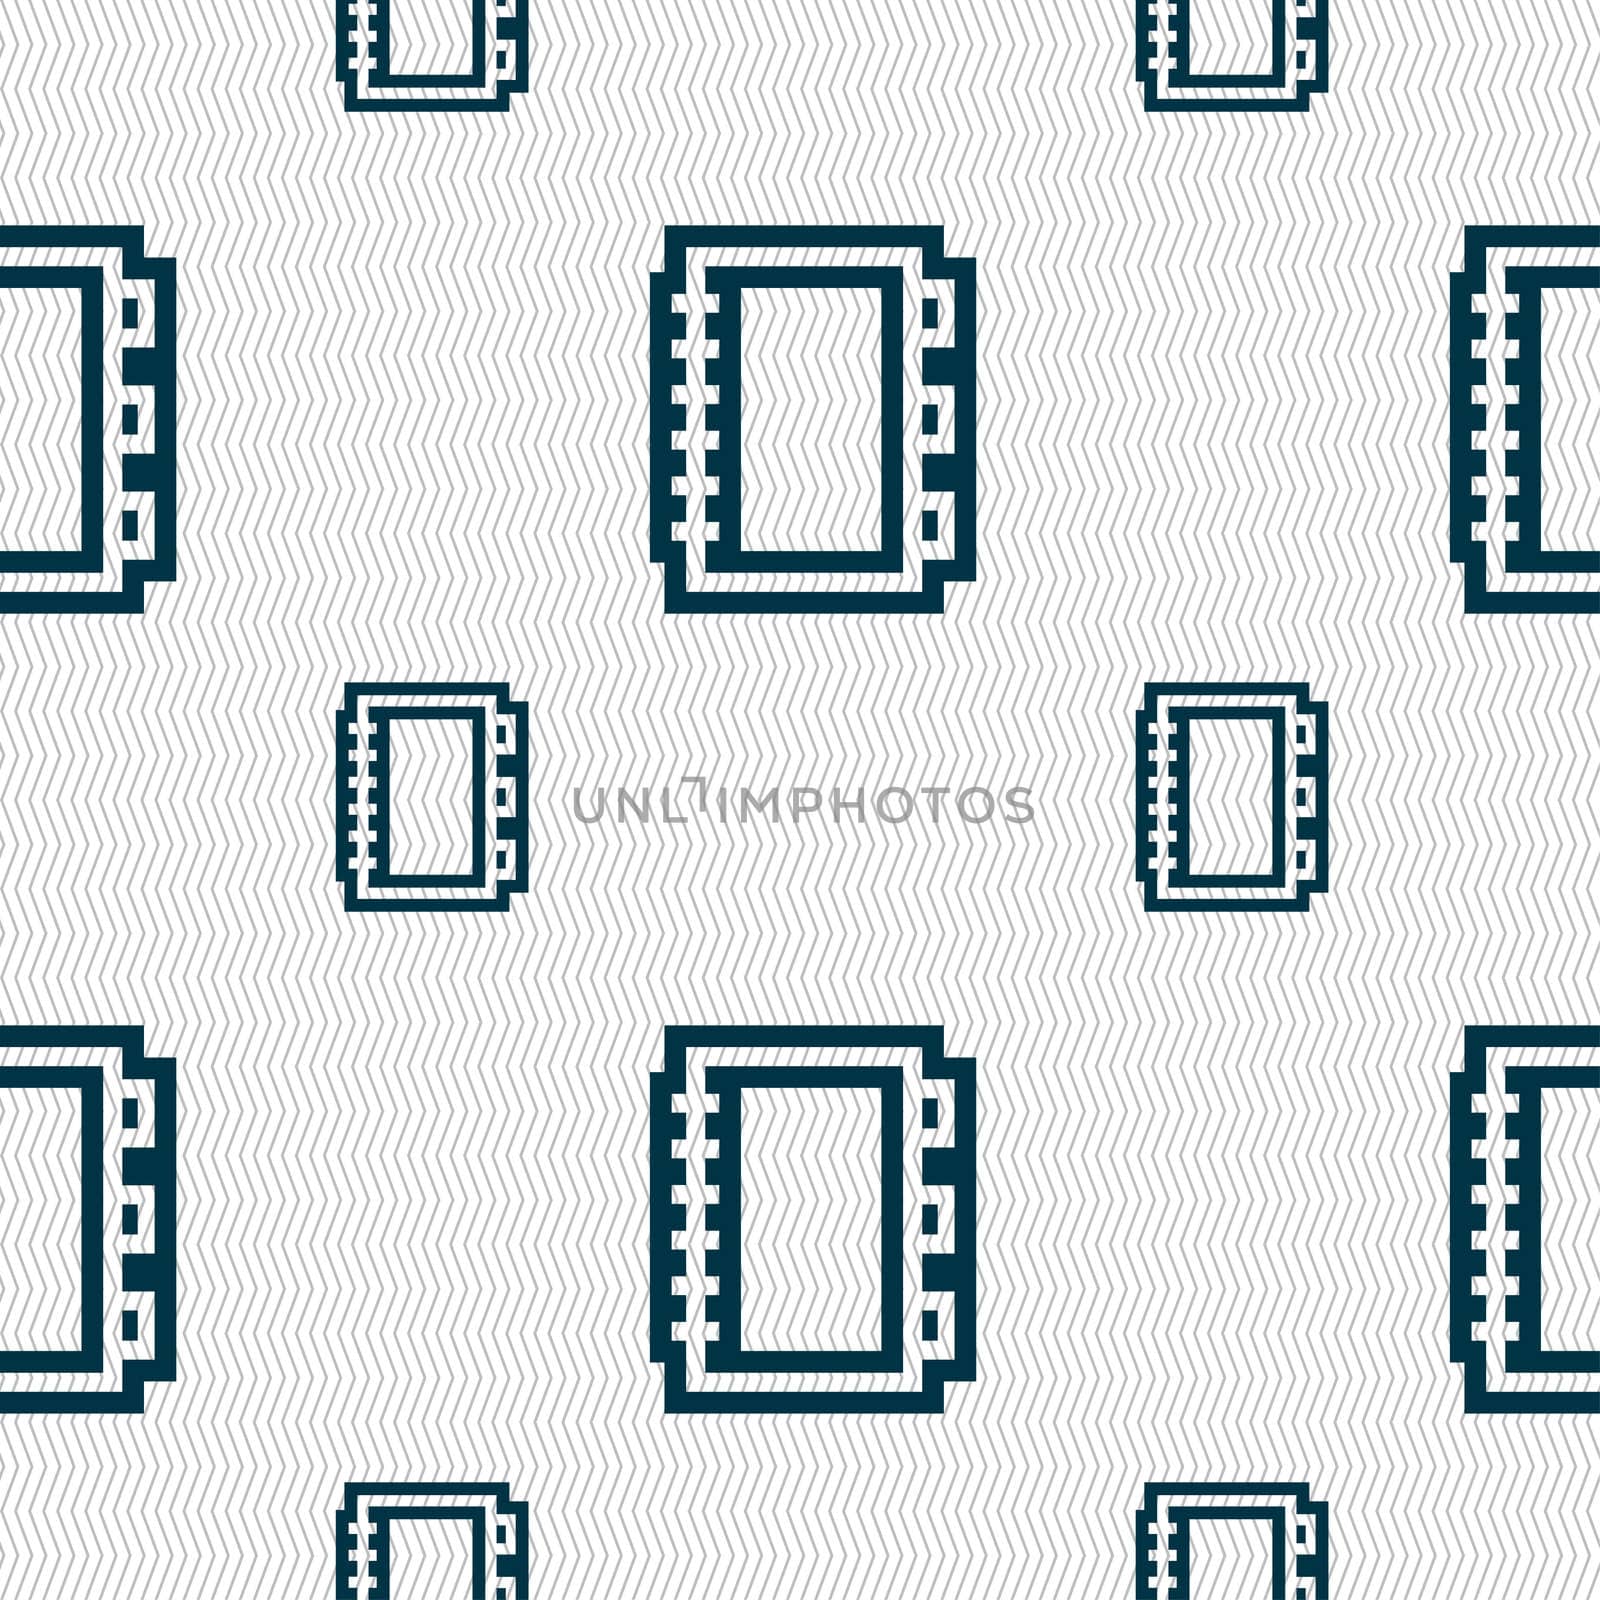 Book icon sign. Seamless pattern with geometric texture. illustration